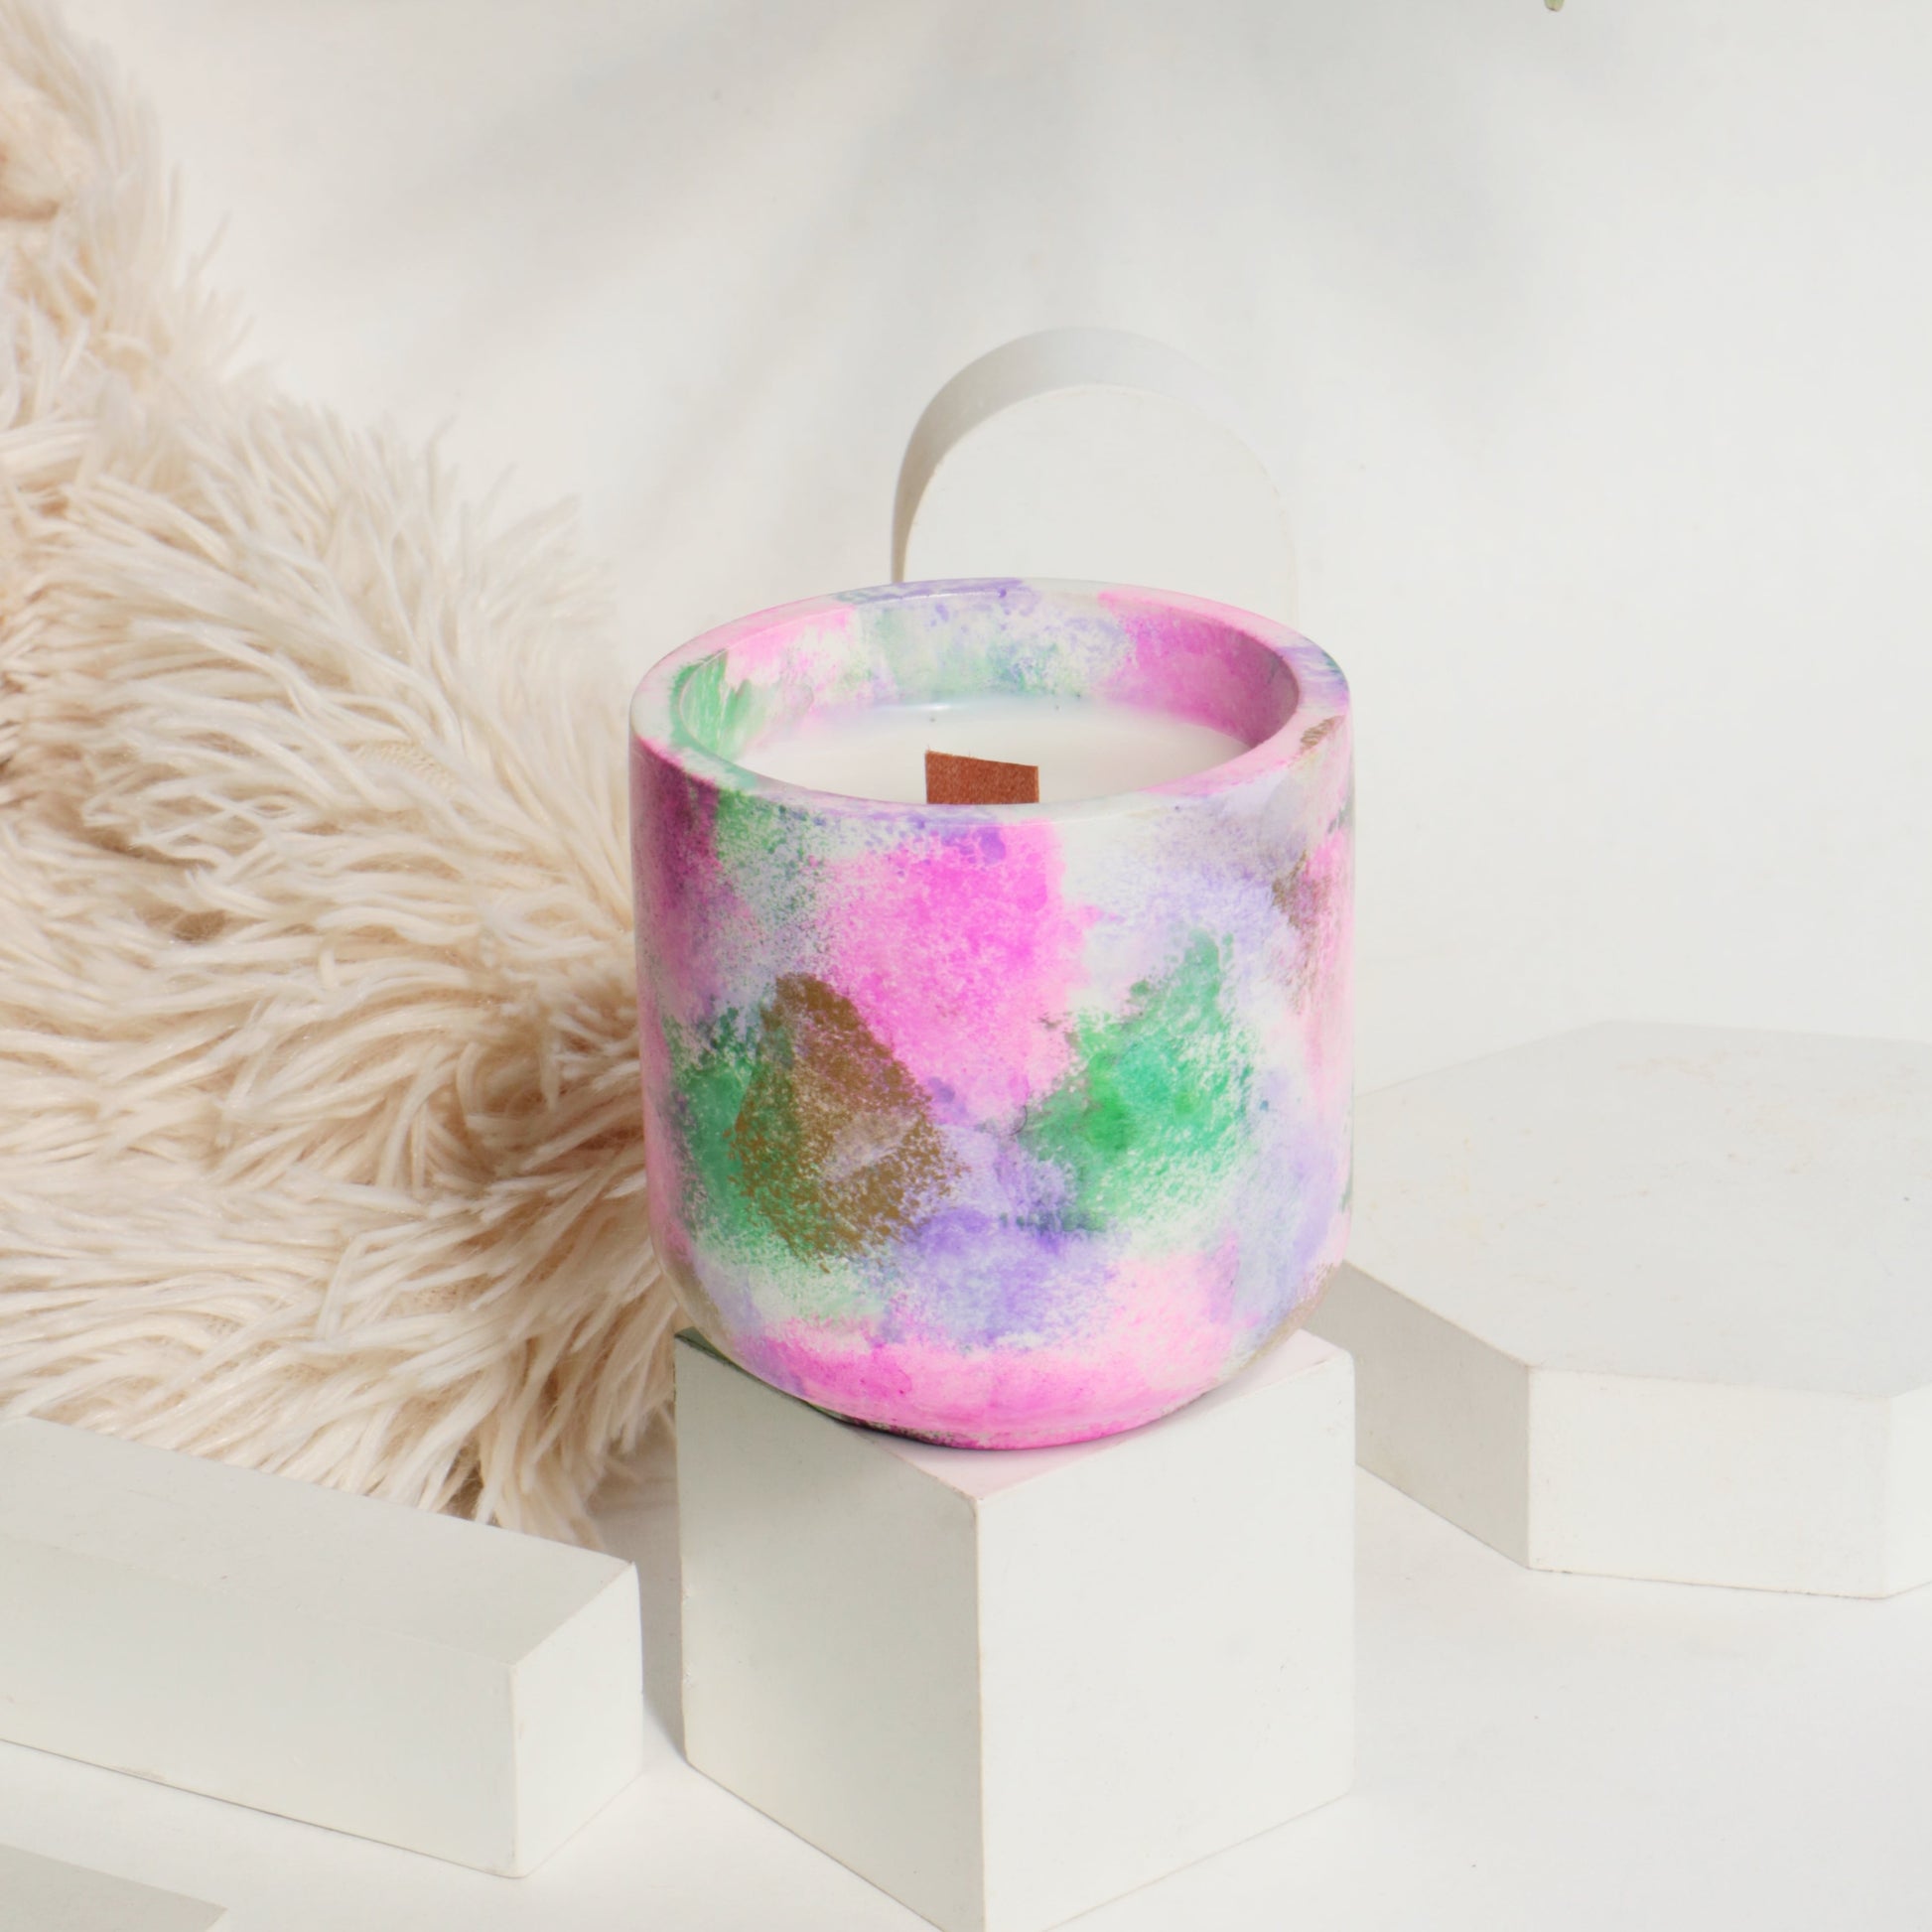 Vanilla candle emitting a sweet and comforting fragrance.